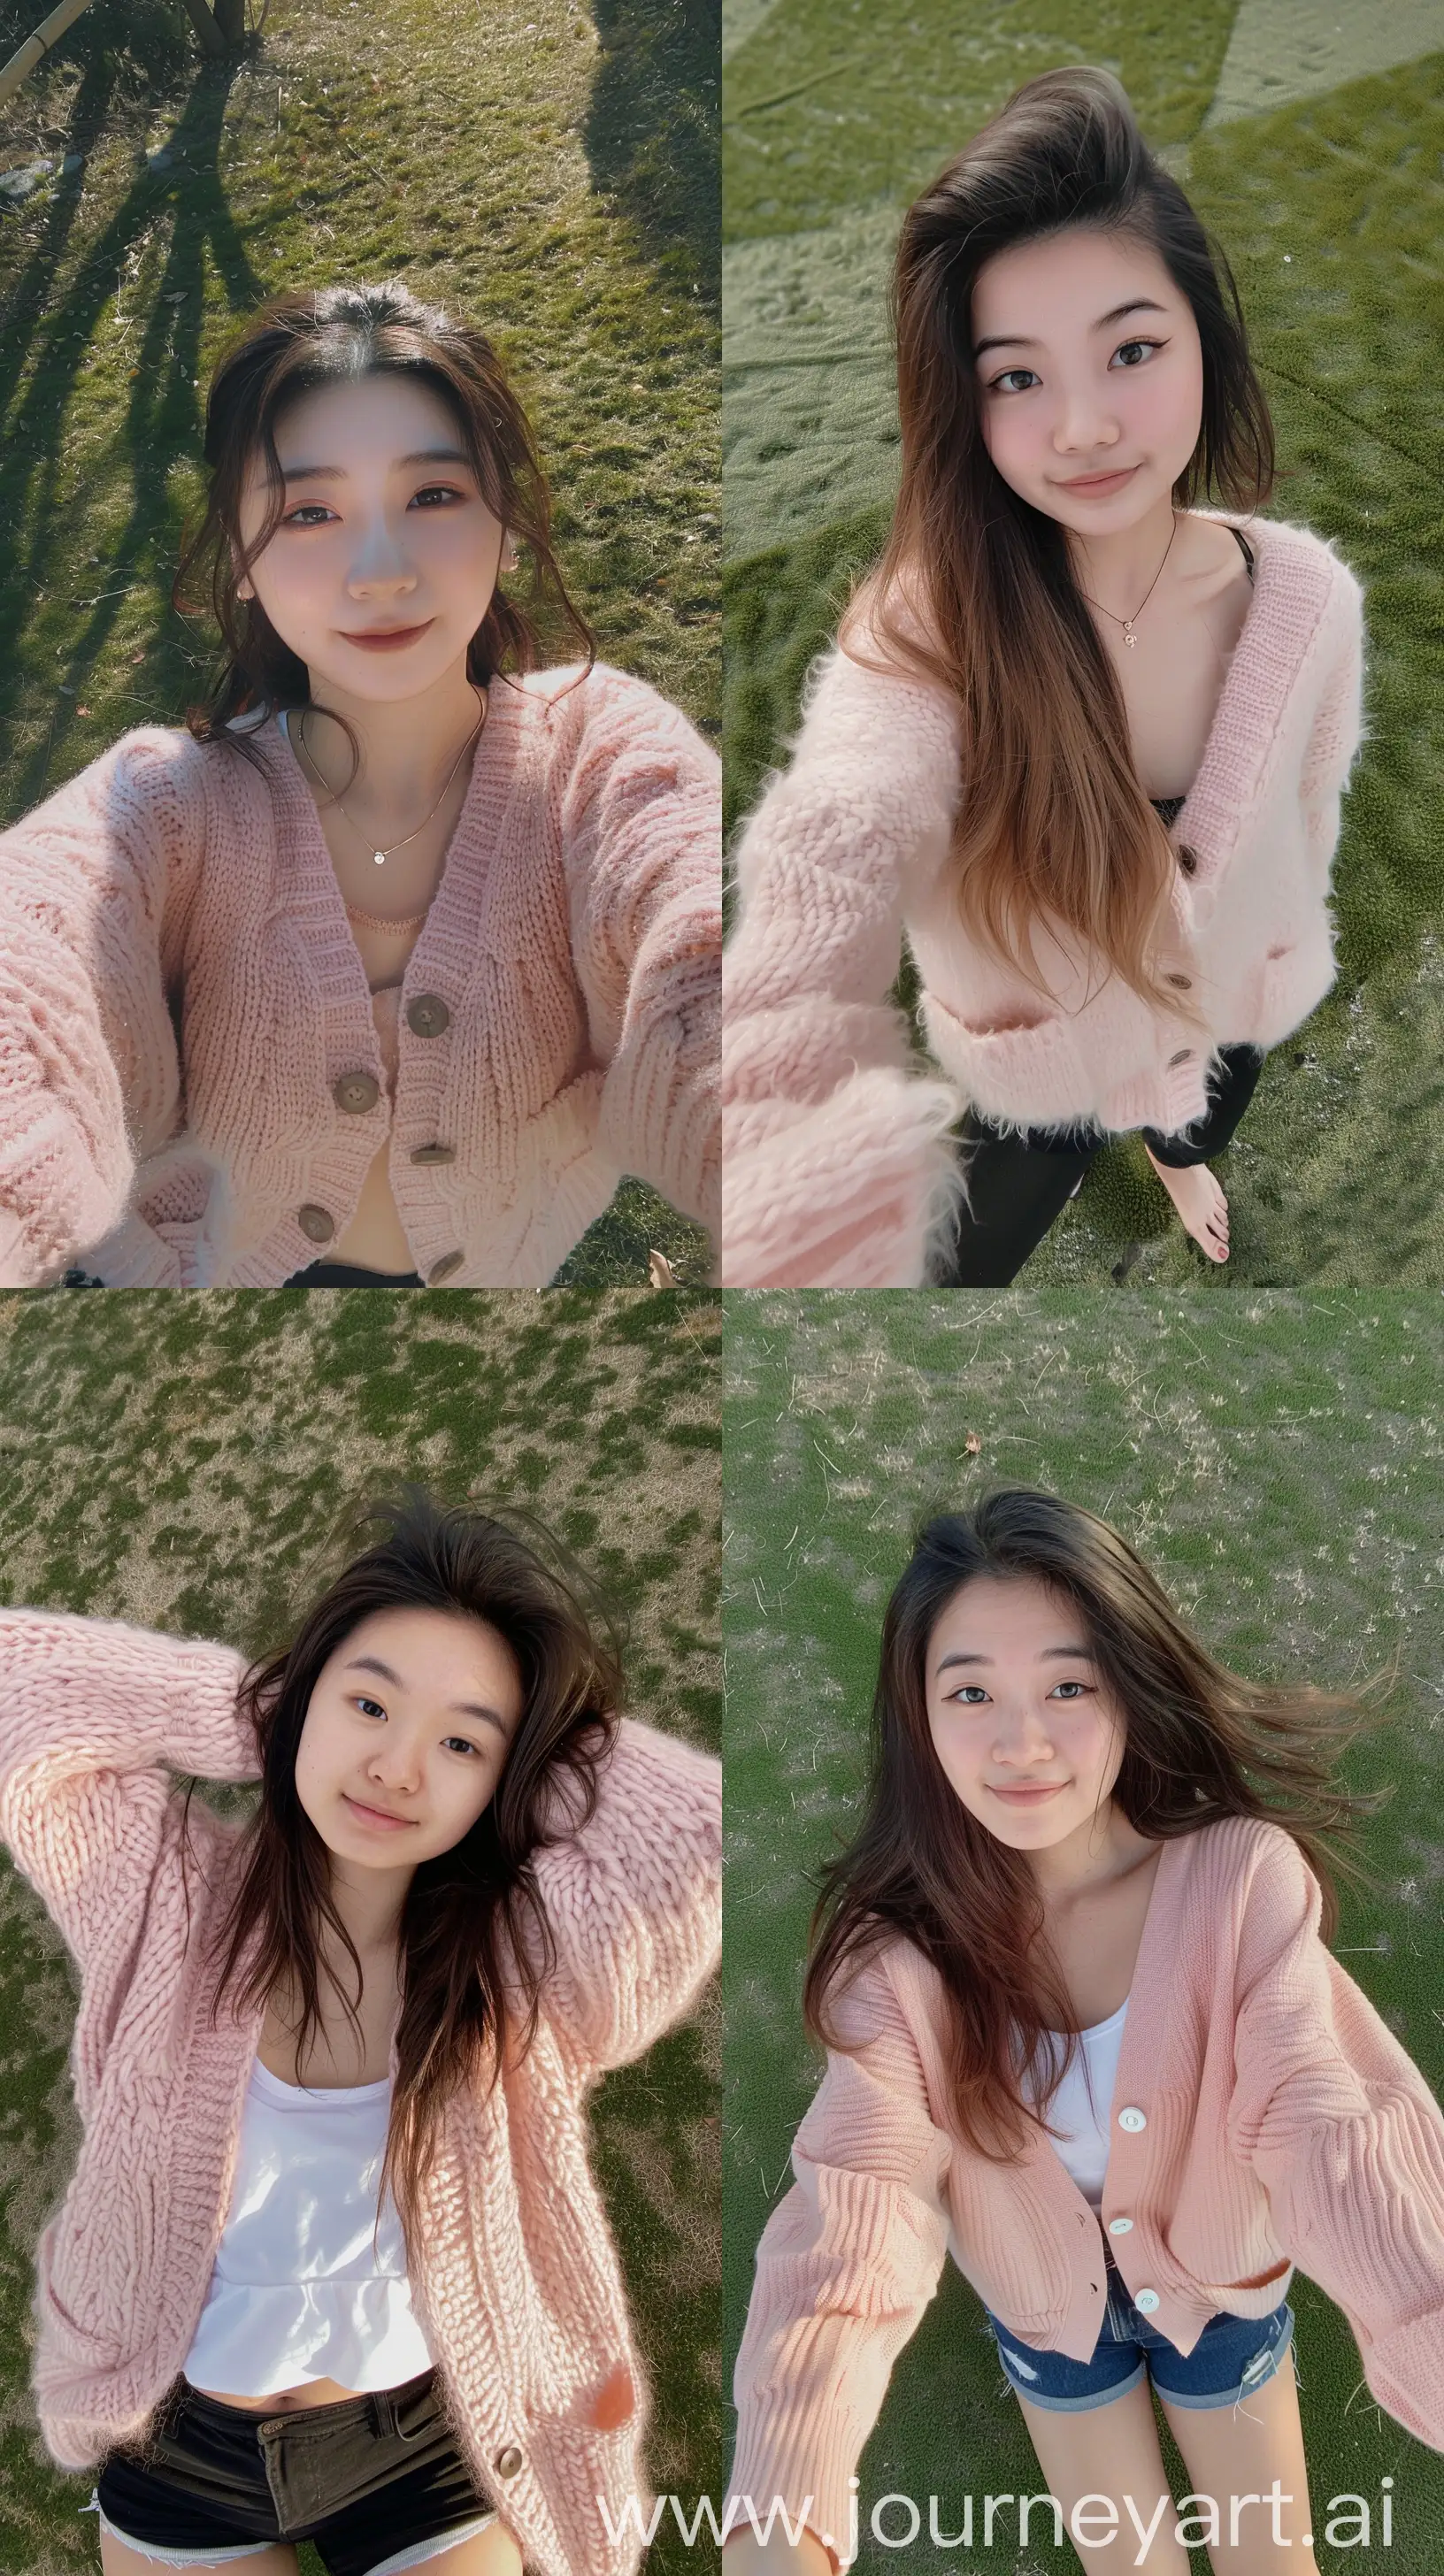 Asian-Teenage-Girl-in-Soft-Pink-Cardigan-Standing-on-Grass-for-Aesthetic-Instagram-Selfie